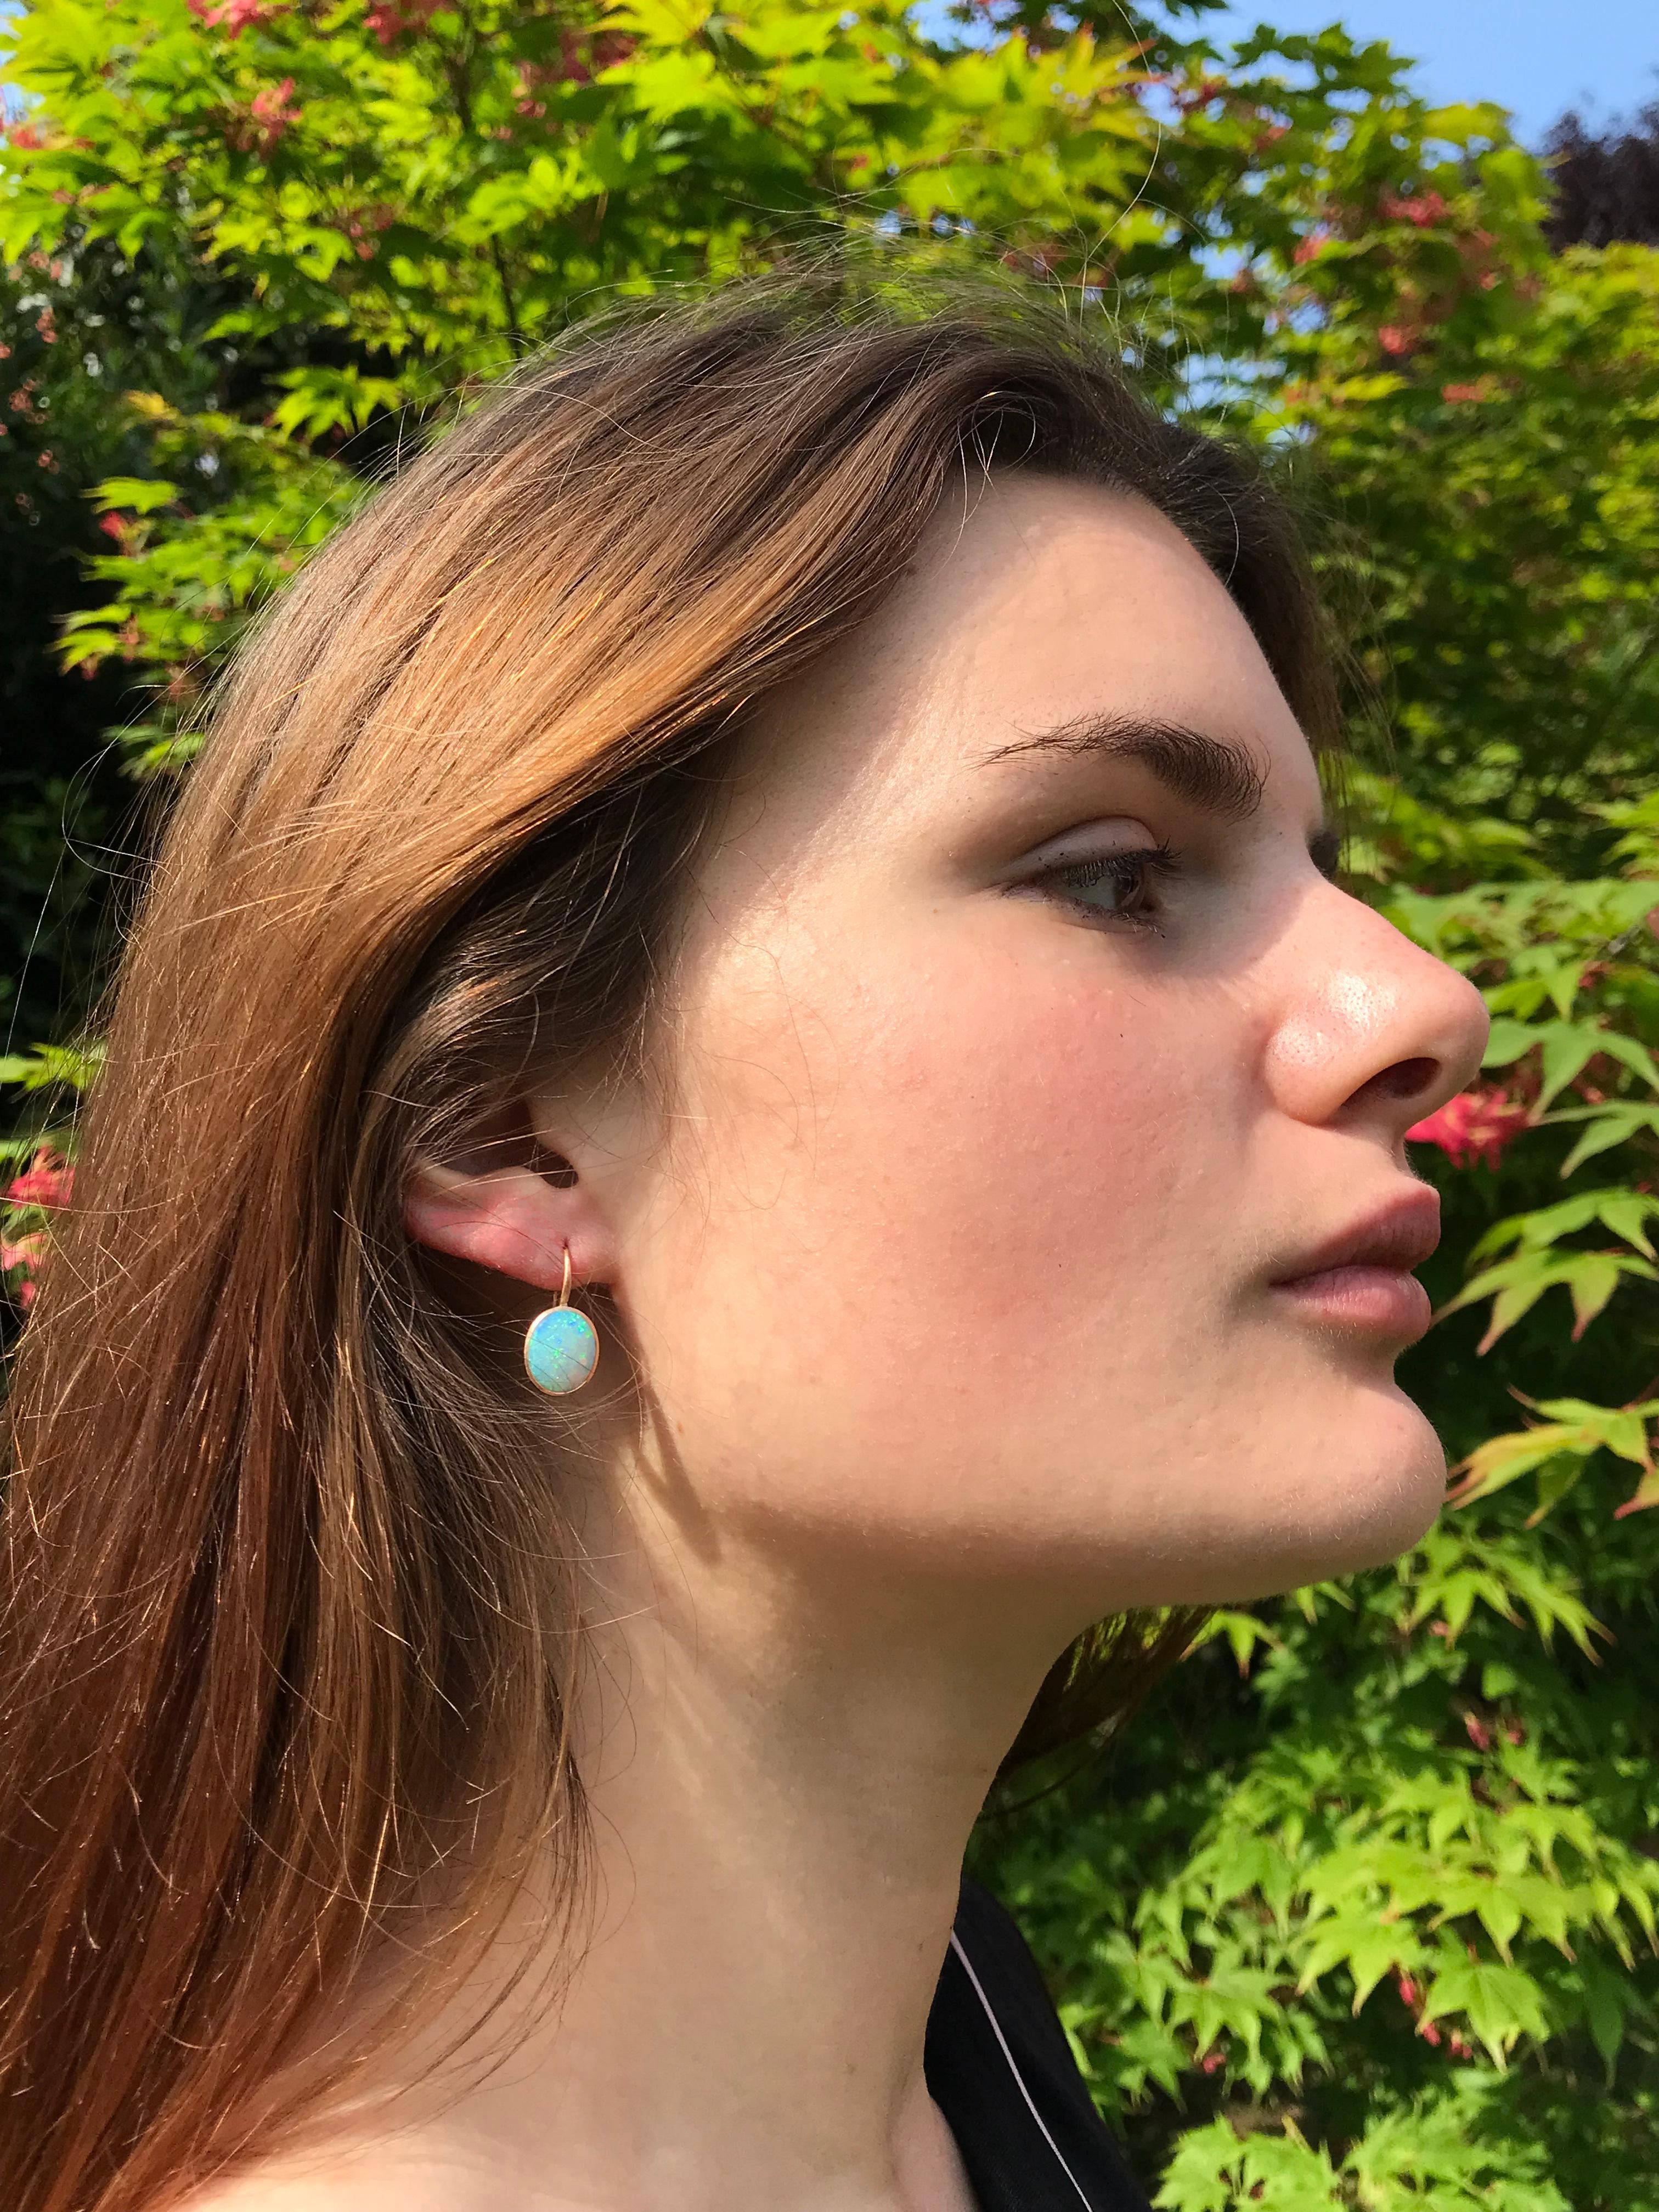 Dalben design  18k rose gold matte finishing small earrings with two bezel-set oval cabochon  light blue Australian solid opals weight 3,28 carats . 
Bezel stone dimensions :
width 10 mm
height without leverback 11,9 mm
height with leverback 20,7